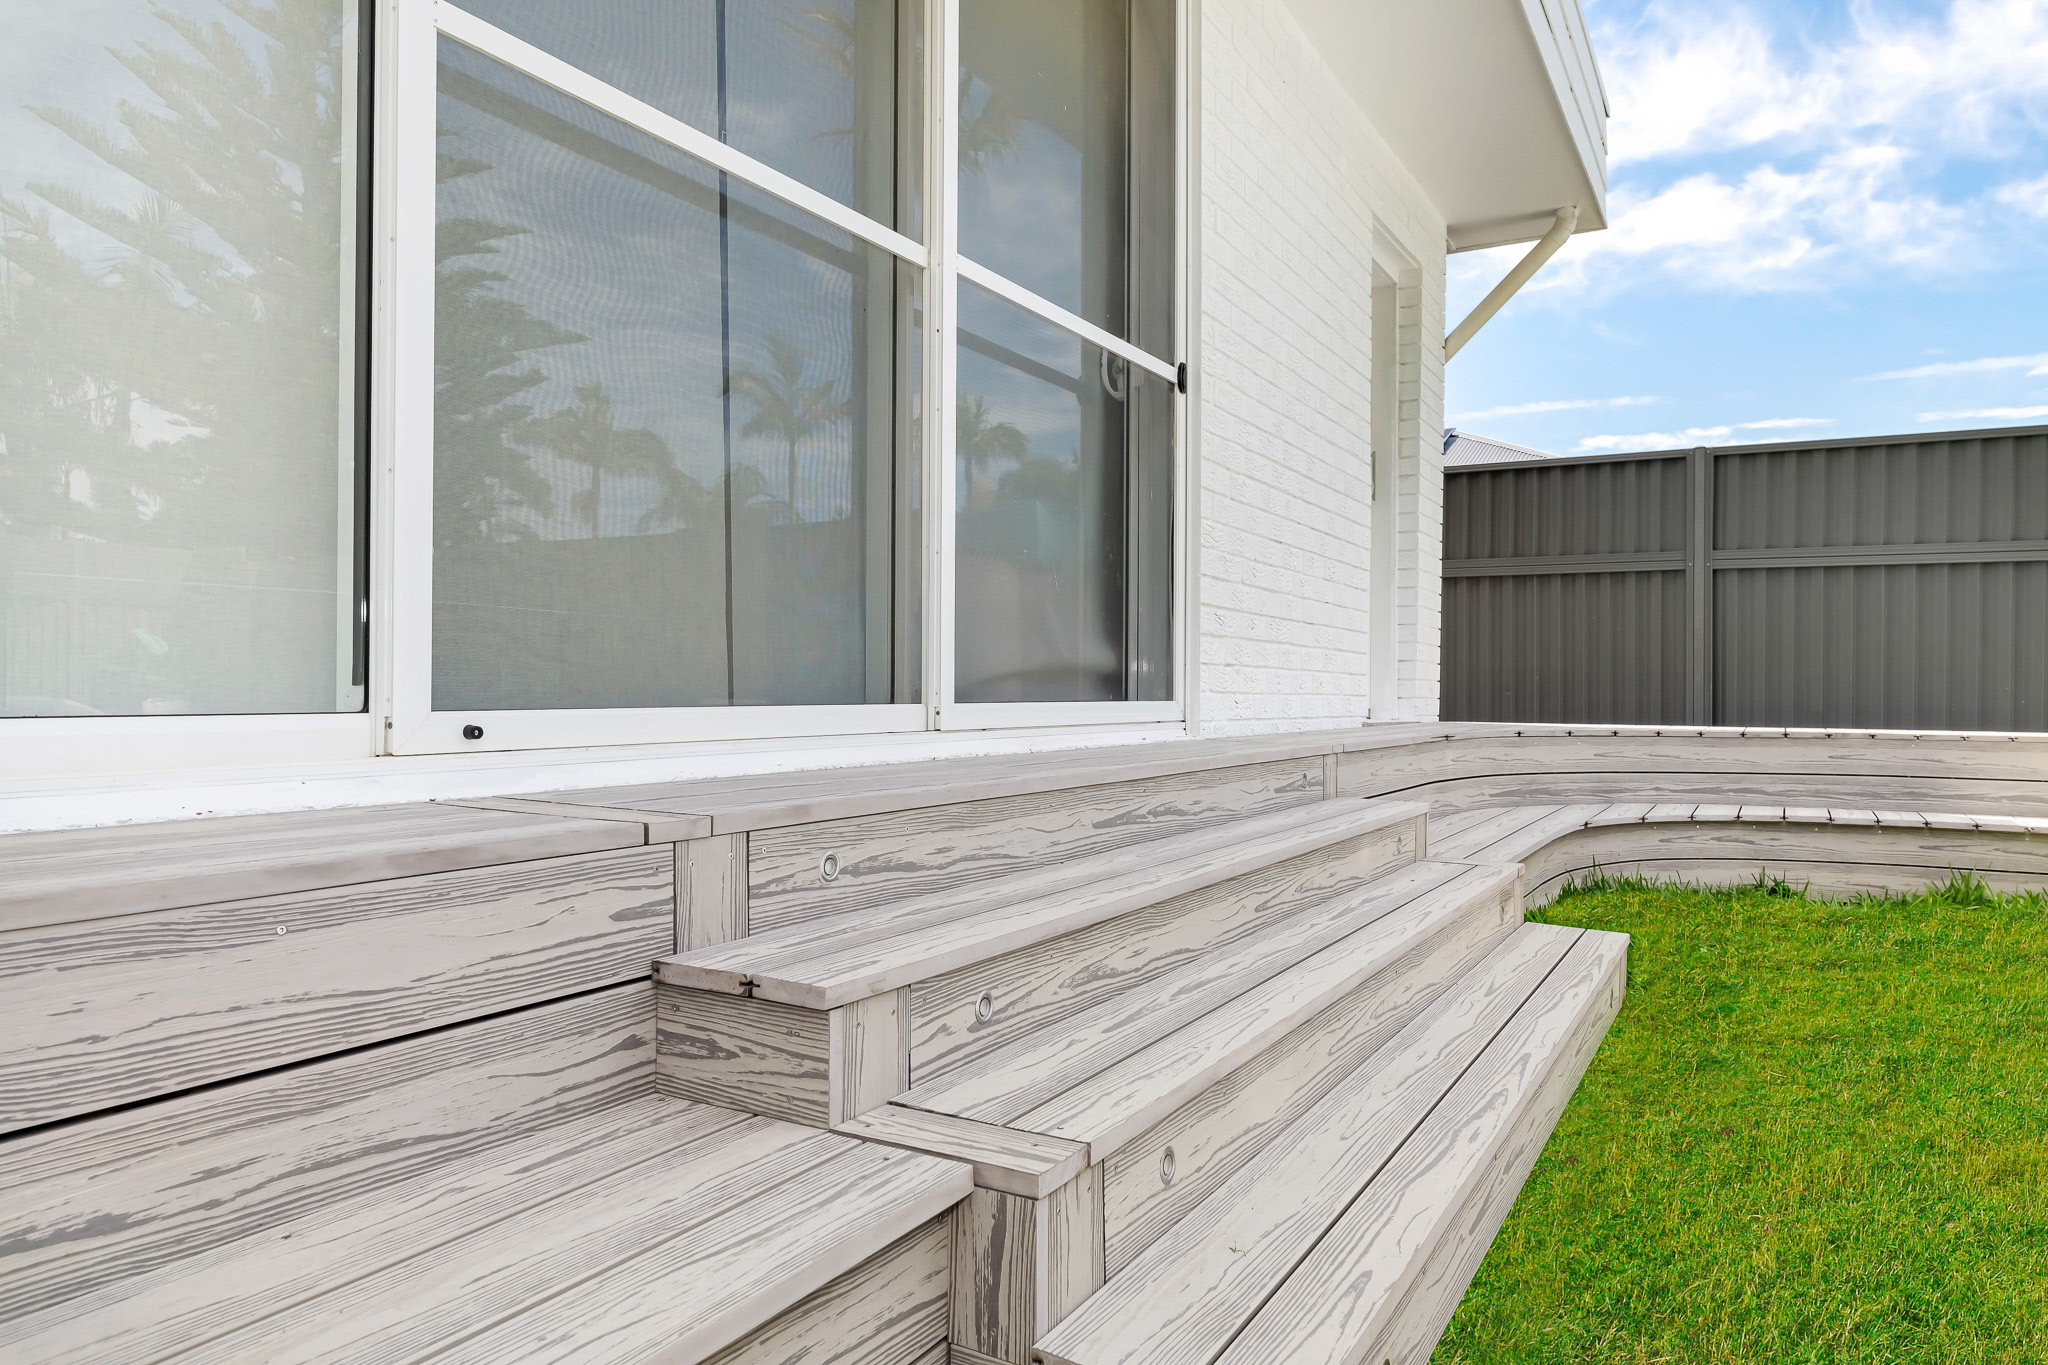 Steps made from gray-silver composite deck boards